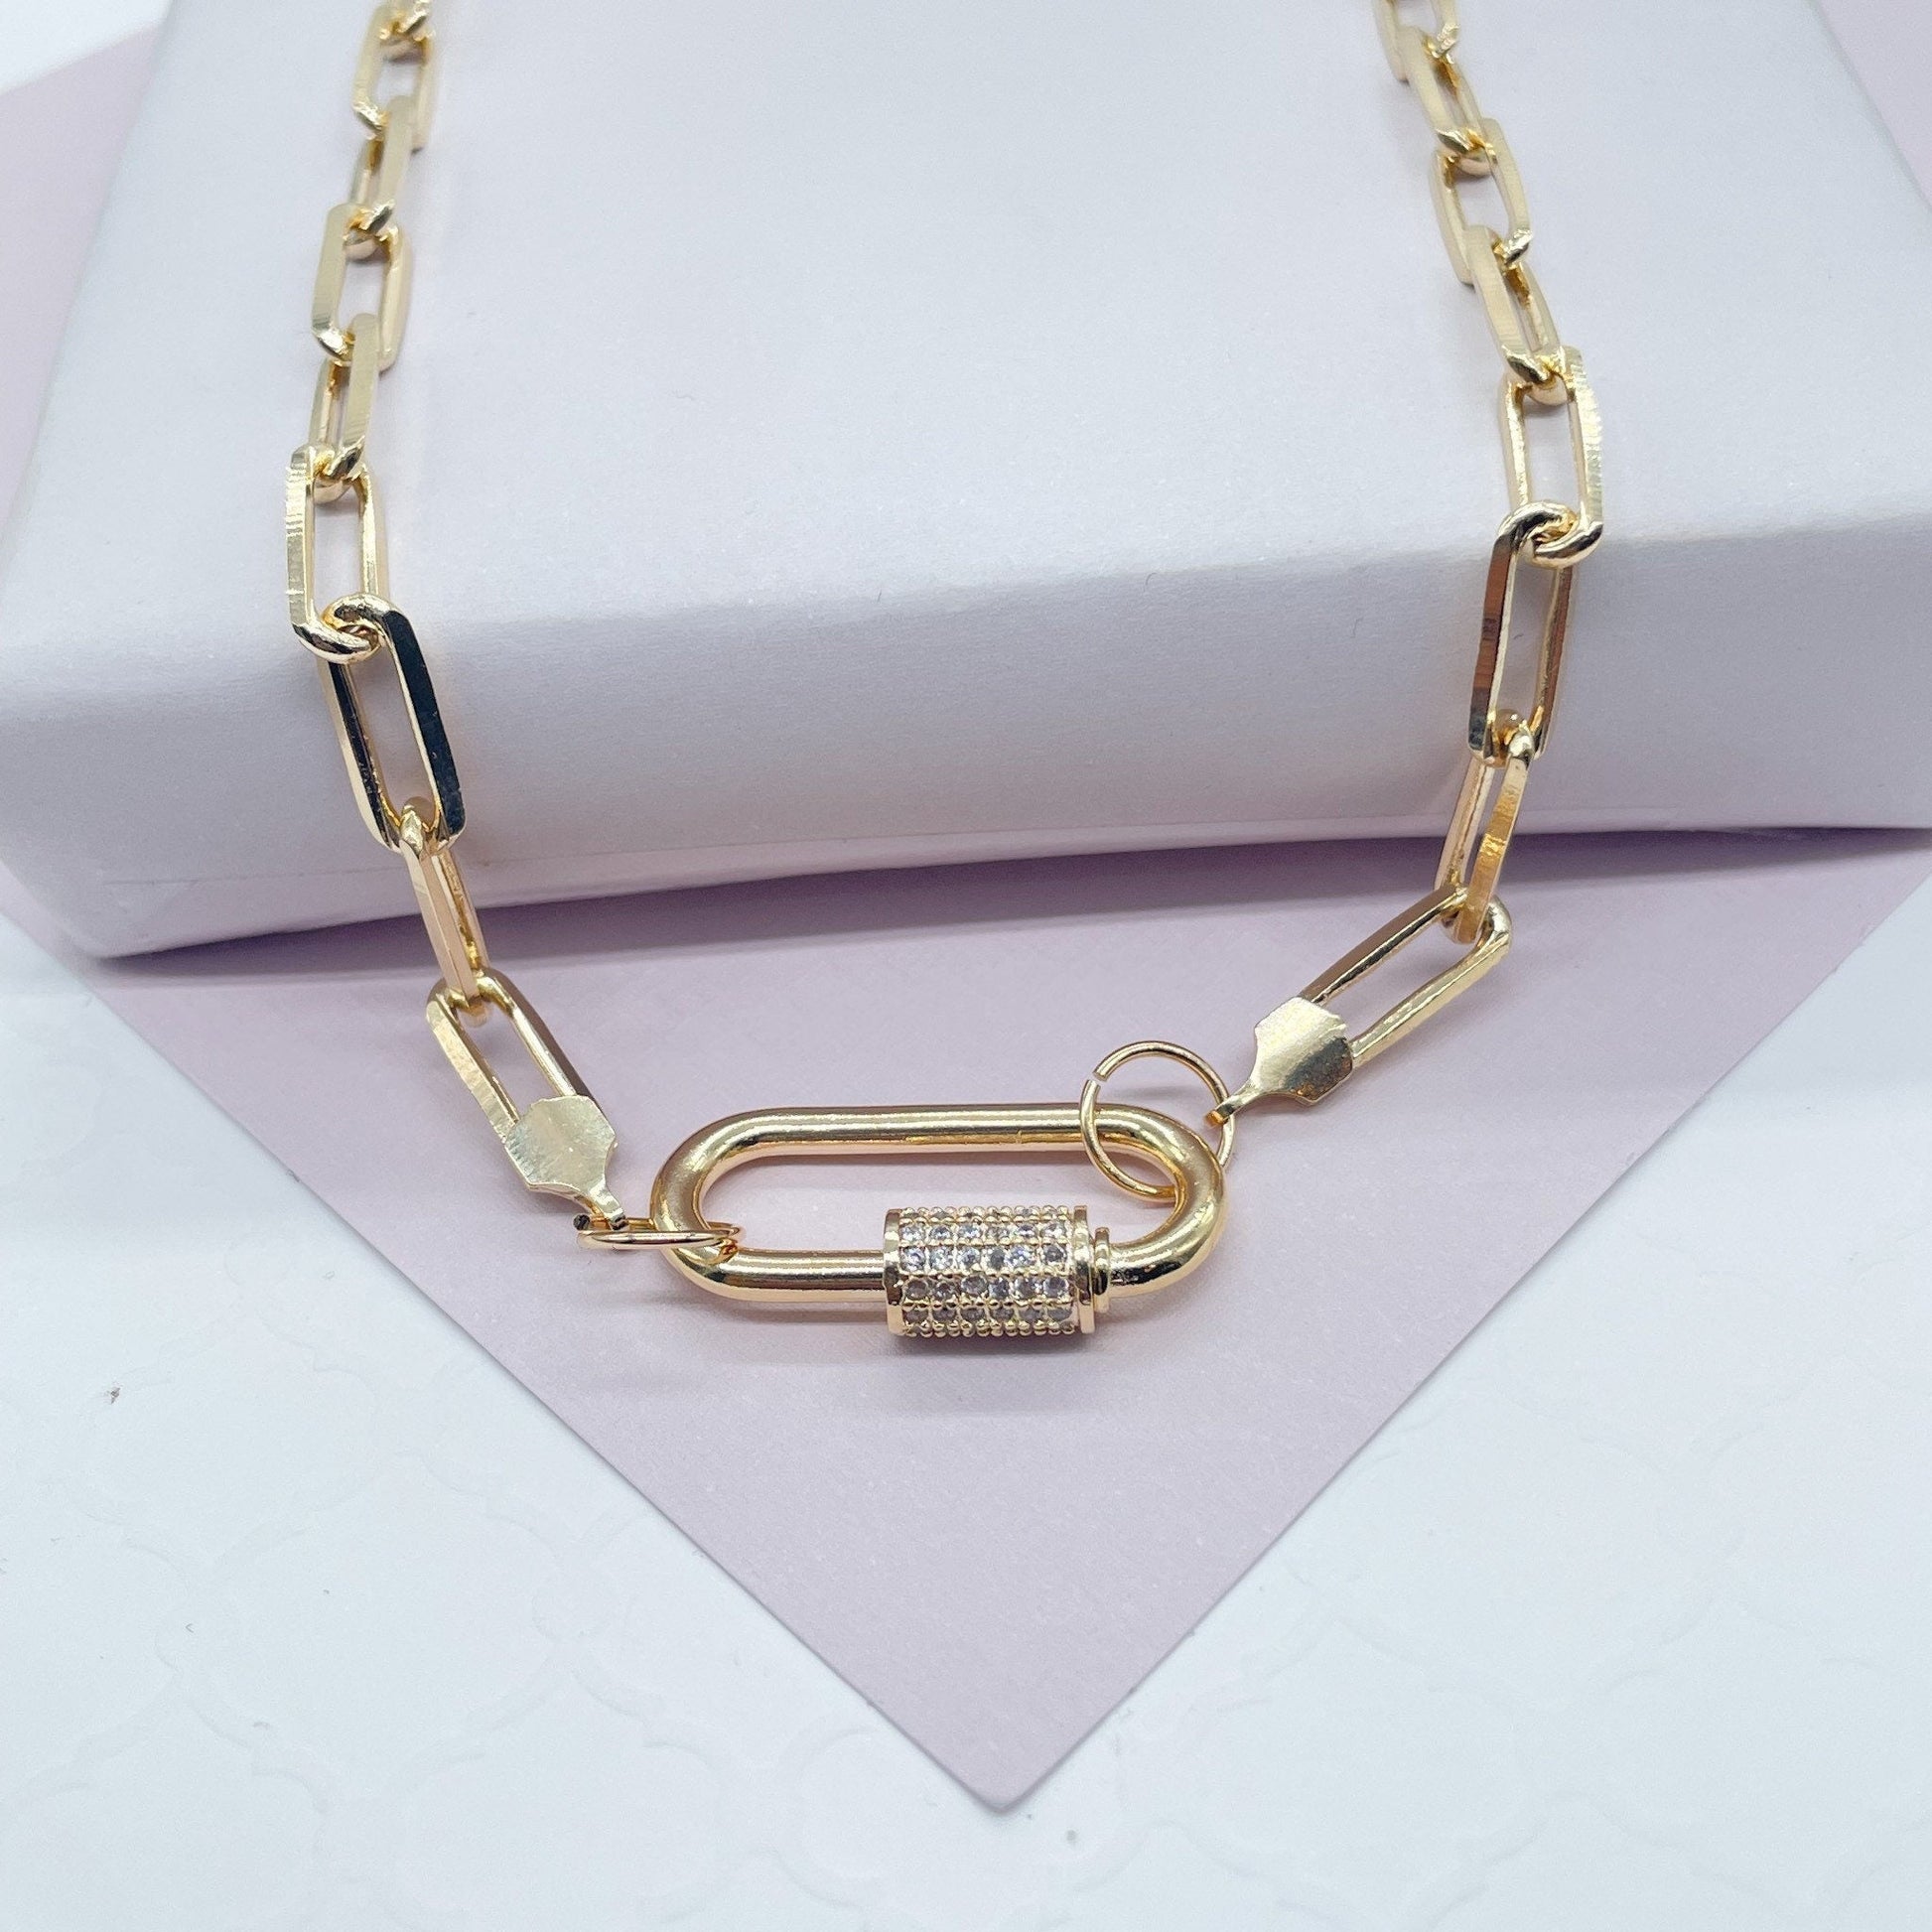 18k Gold Filled Paperclip Choker with Zirconia Carabiner Front Lock